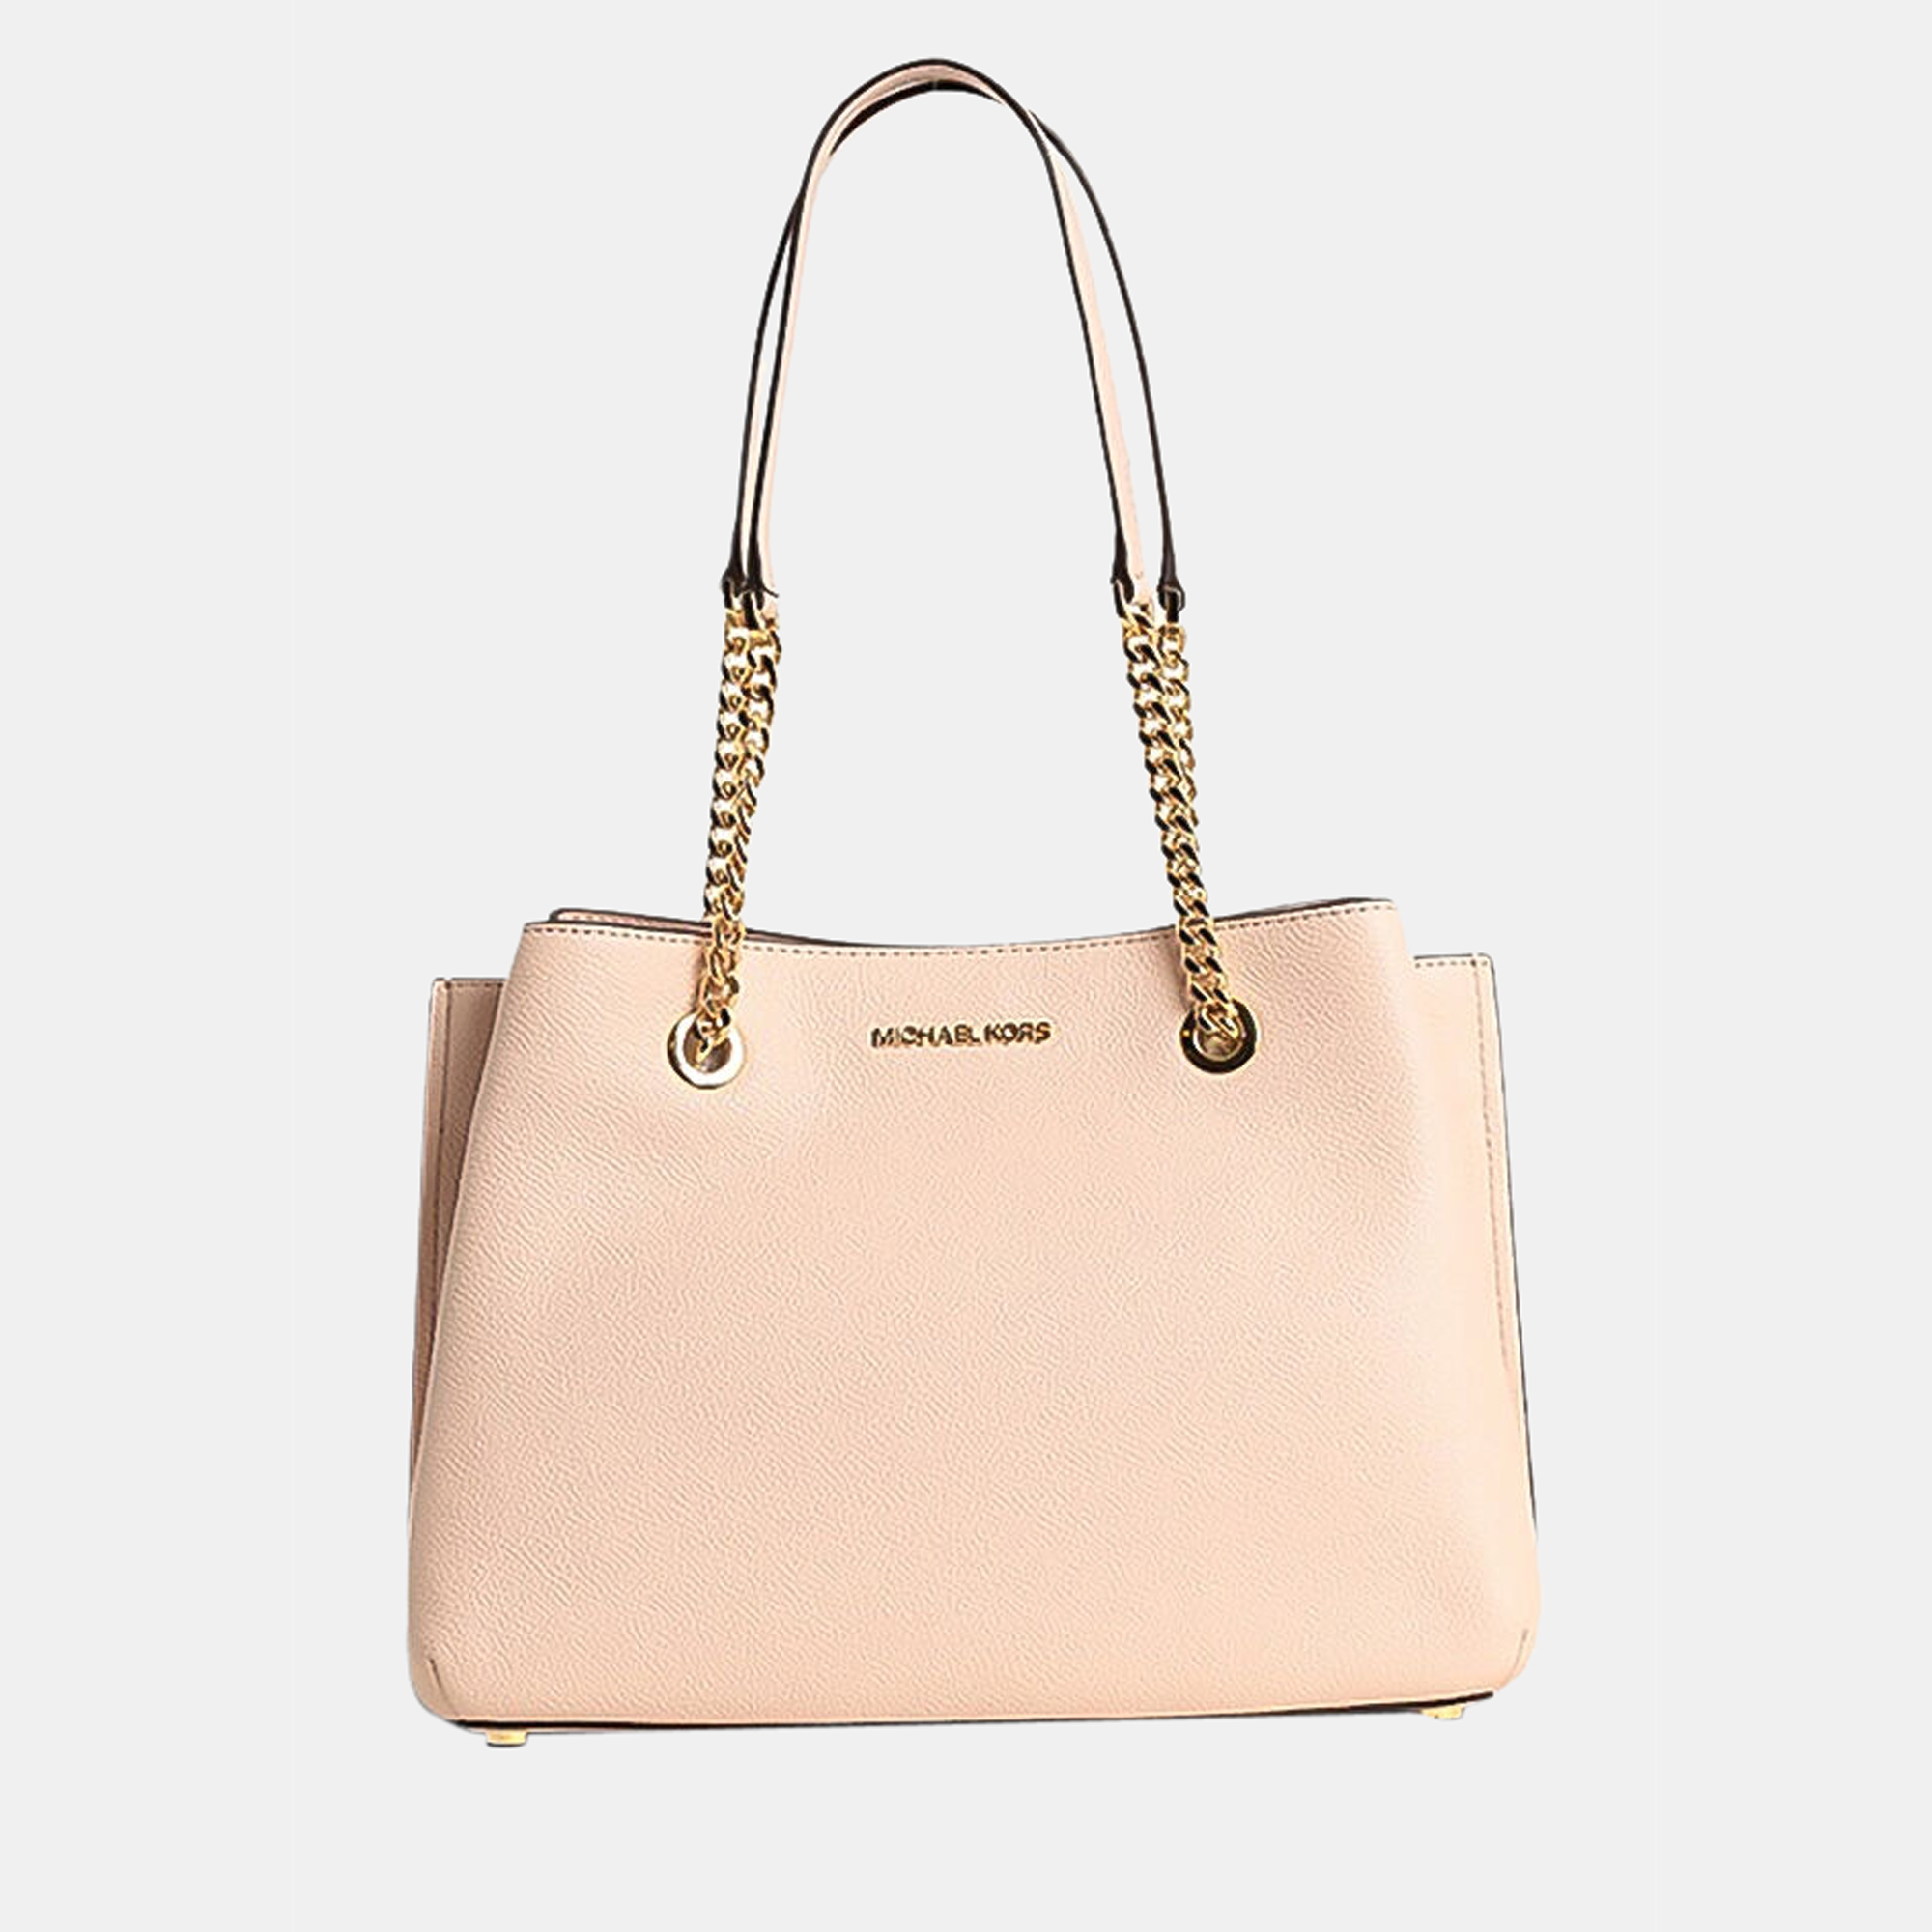 Functional and stylish this designer labels collections capture the effortless elegant finesse of the modern woman. Crafted from quality materials this chic bag is easy to carry and can fit in your daily essentials effortlessly.